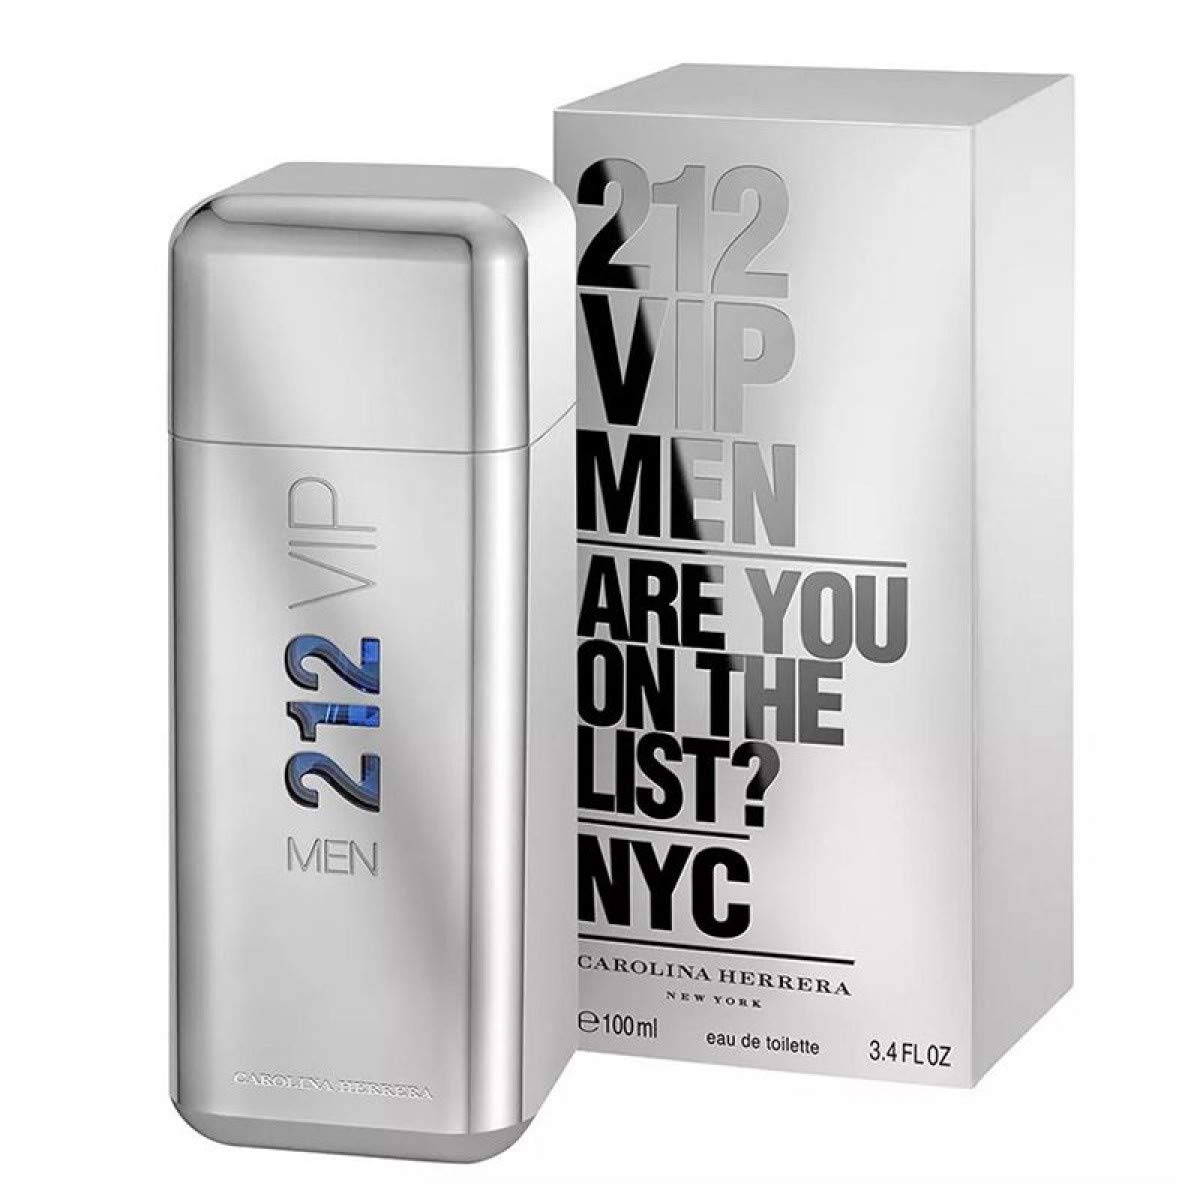 CAROLINA HERRERA 212 VIP NYC FOR MEN ARE YOU ON THE LIST? EDT NATURAL ...